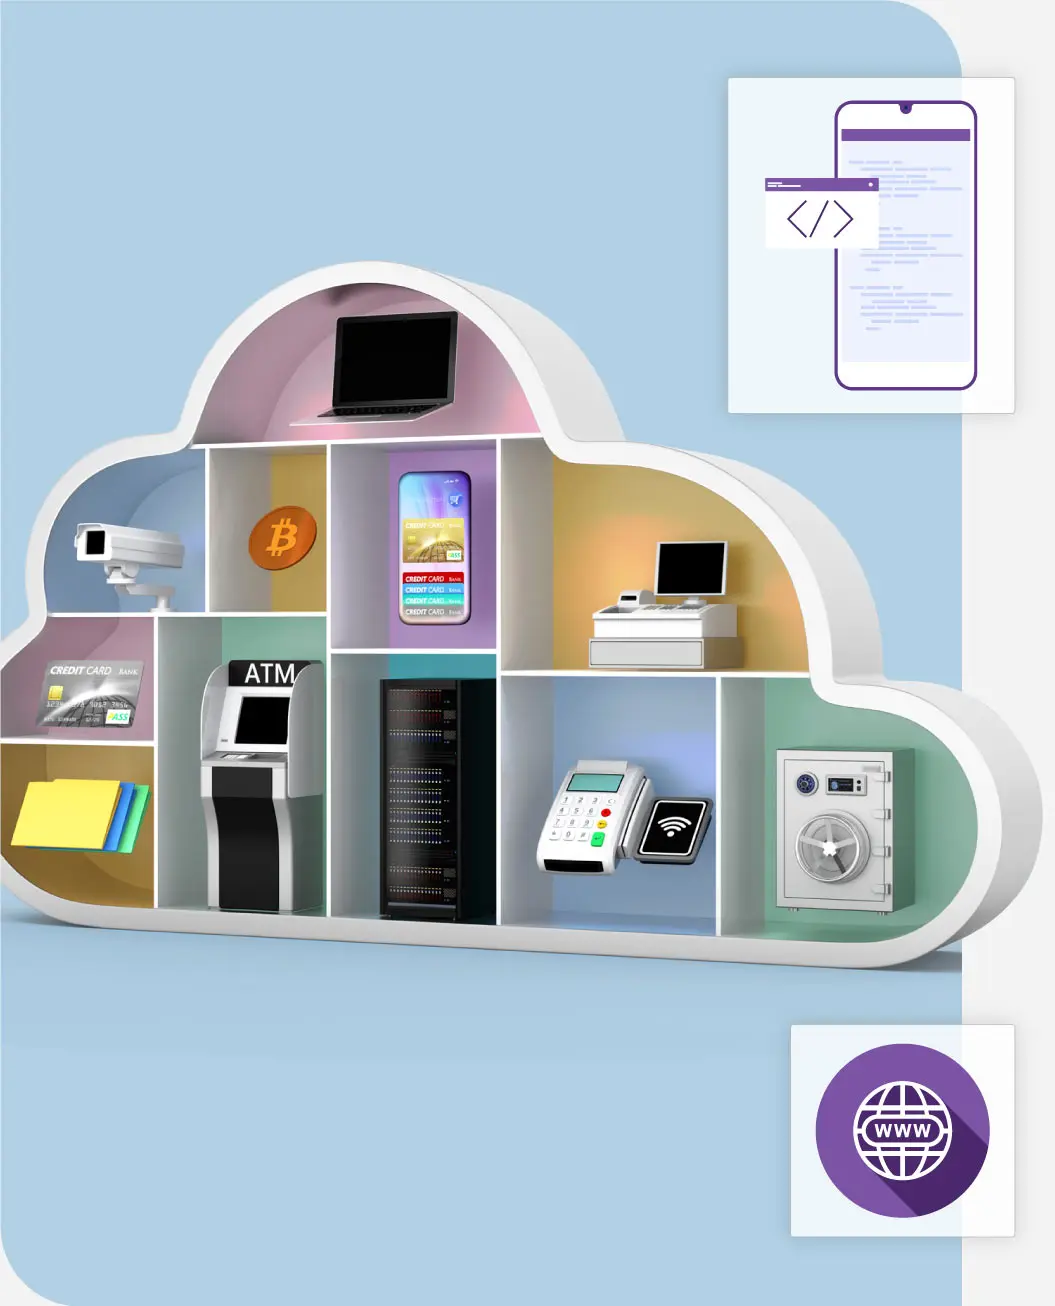 Illustration of a cloud storing many items related to the financial services and fintech industry